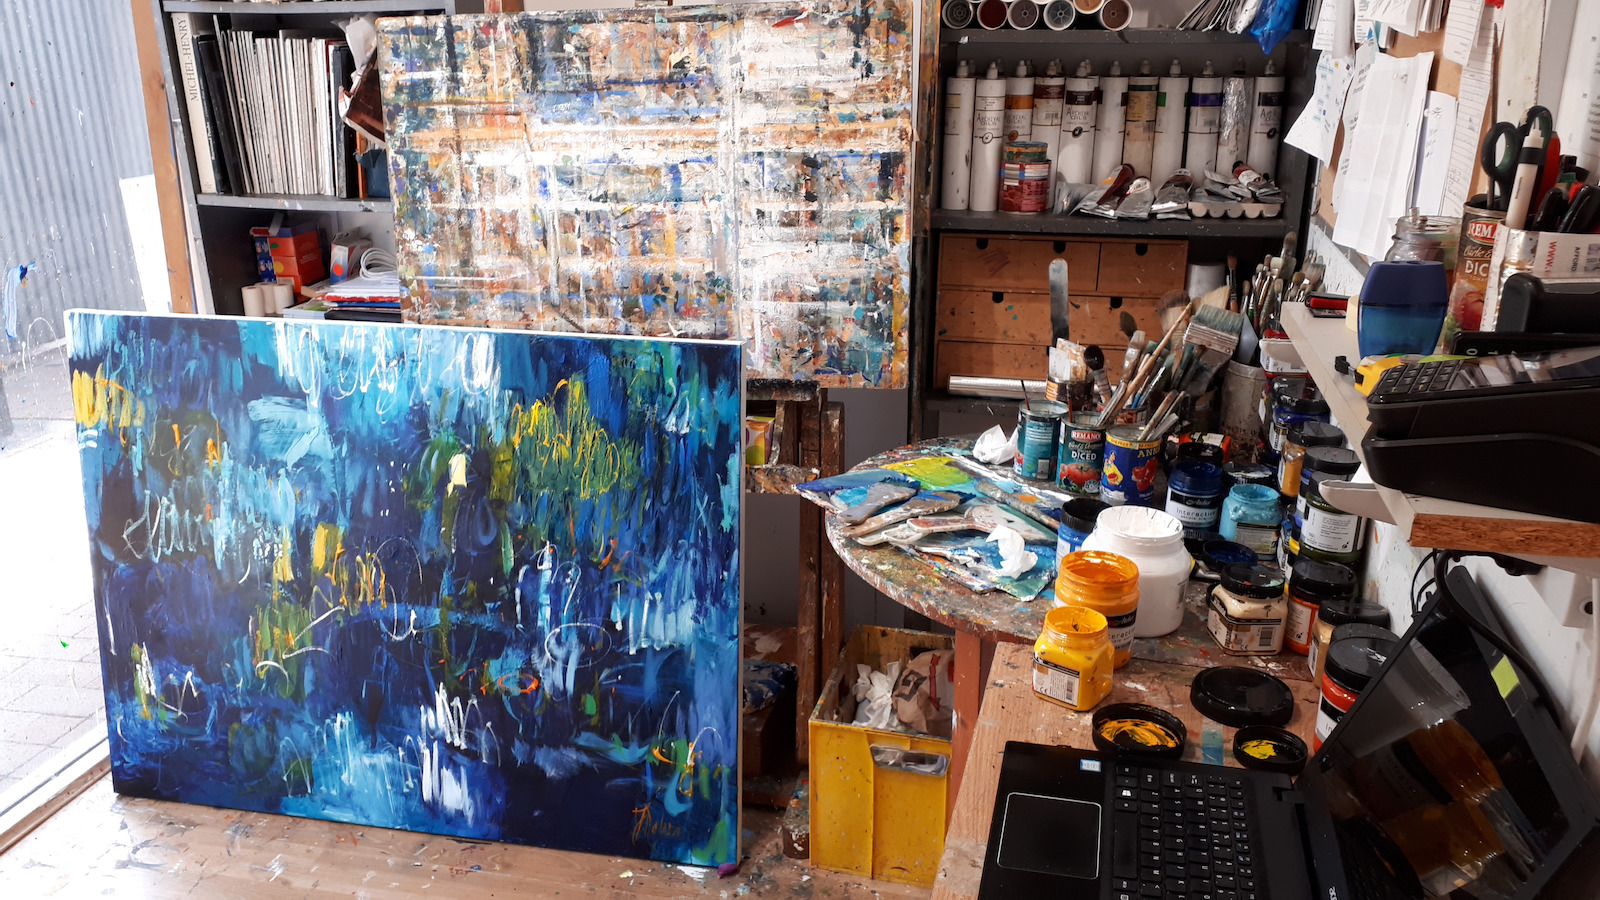 Art Studio Work On Original Abstract Painting "Days like This" By Judith Dalozzo